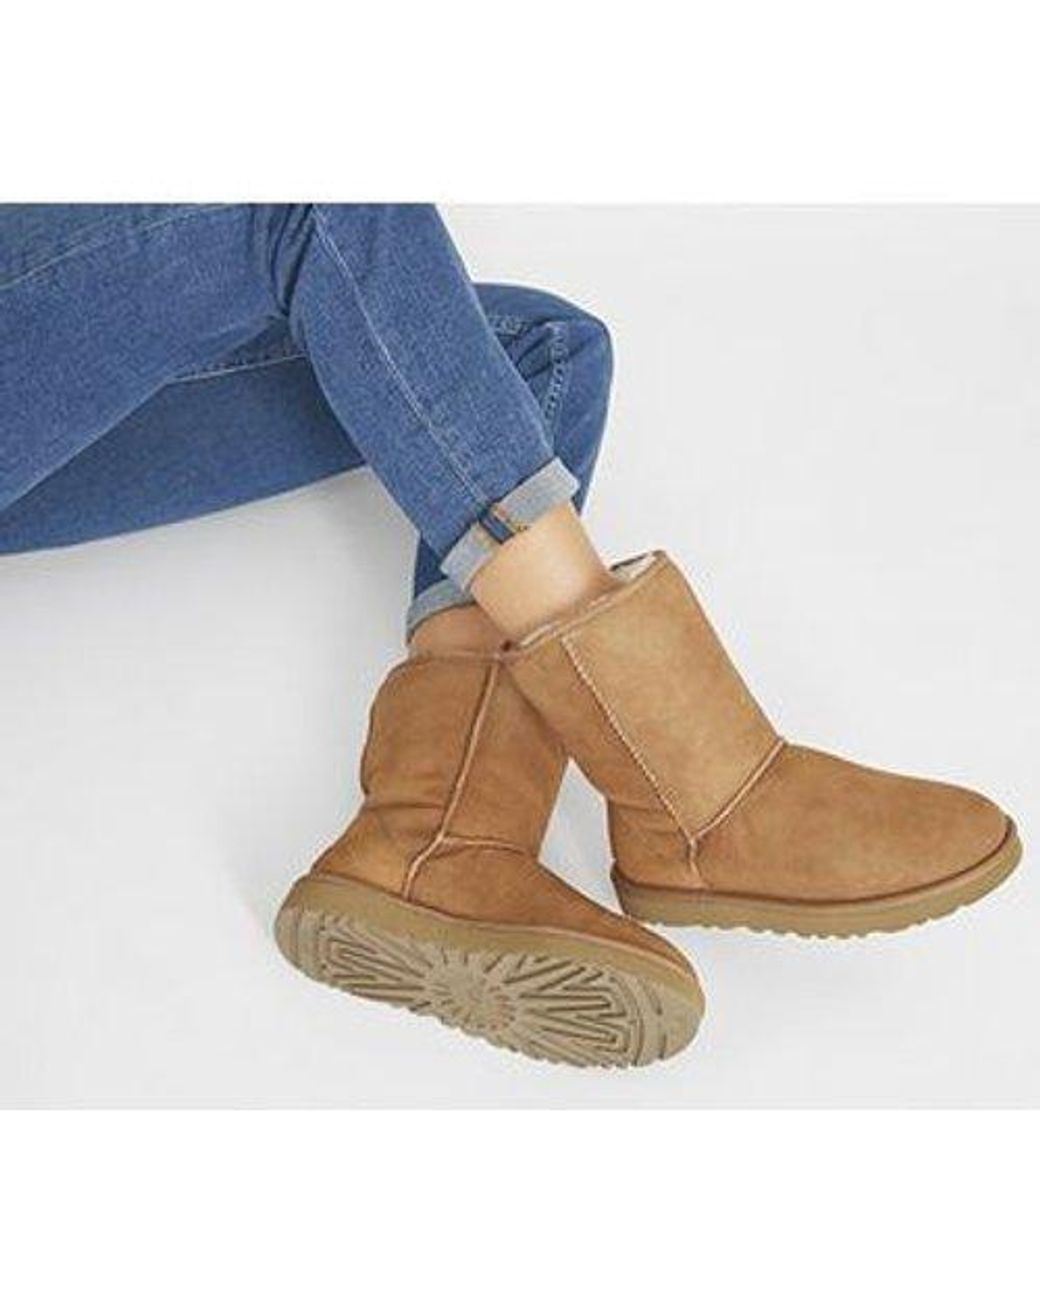 UGG Suede Classic Short Ii Boots in Tan (Blue) - Lyst